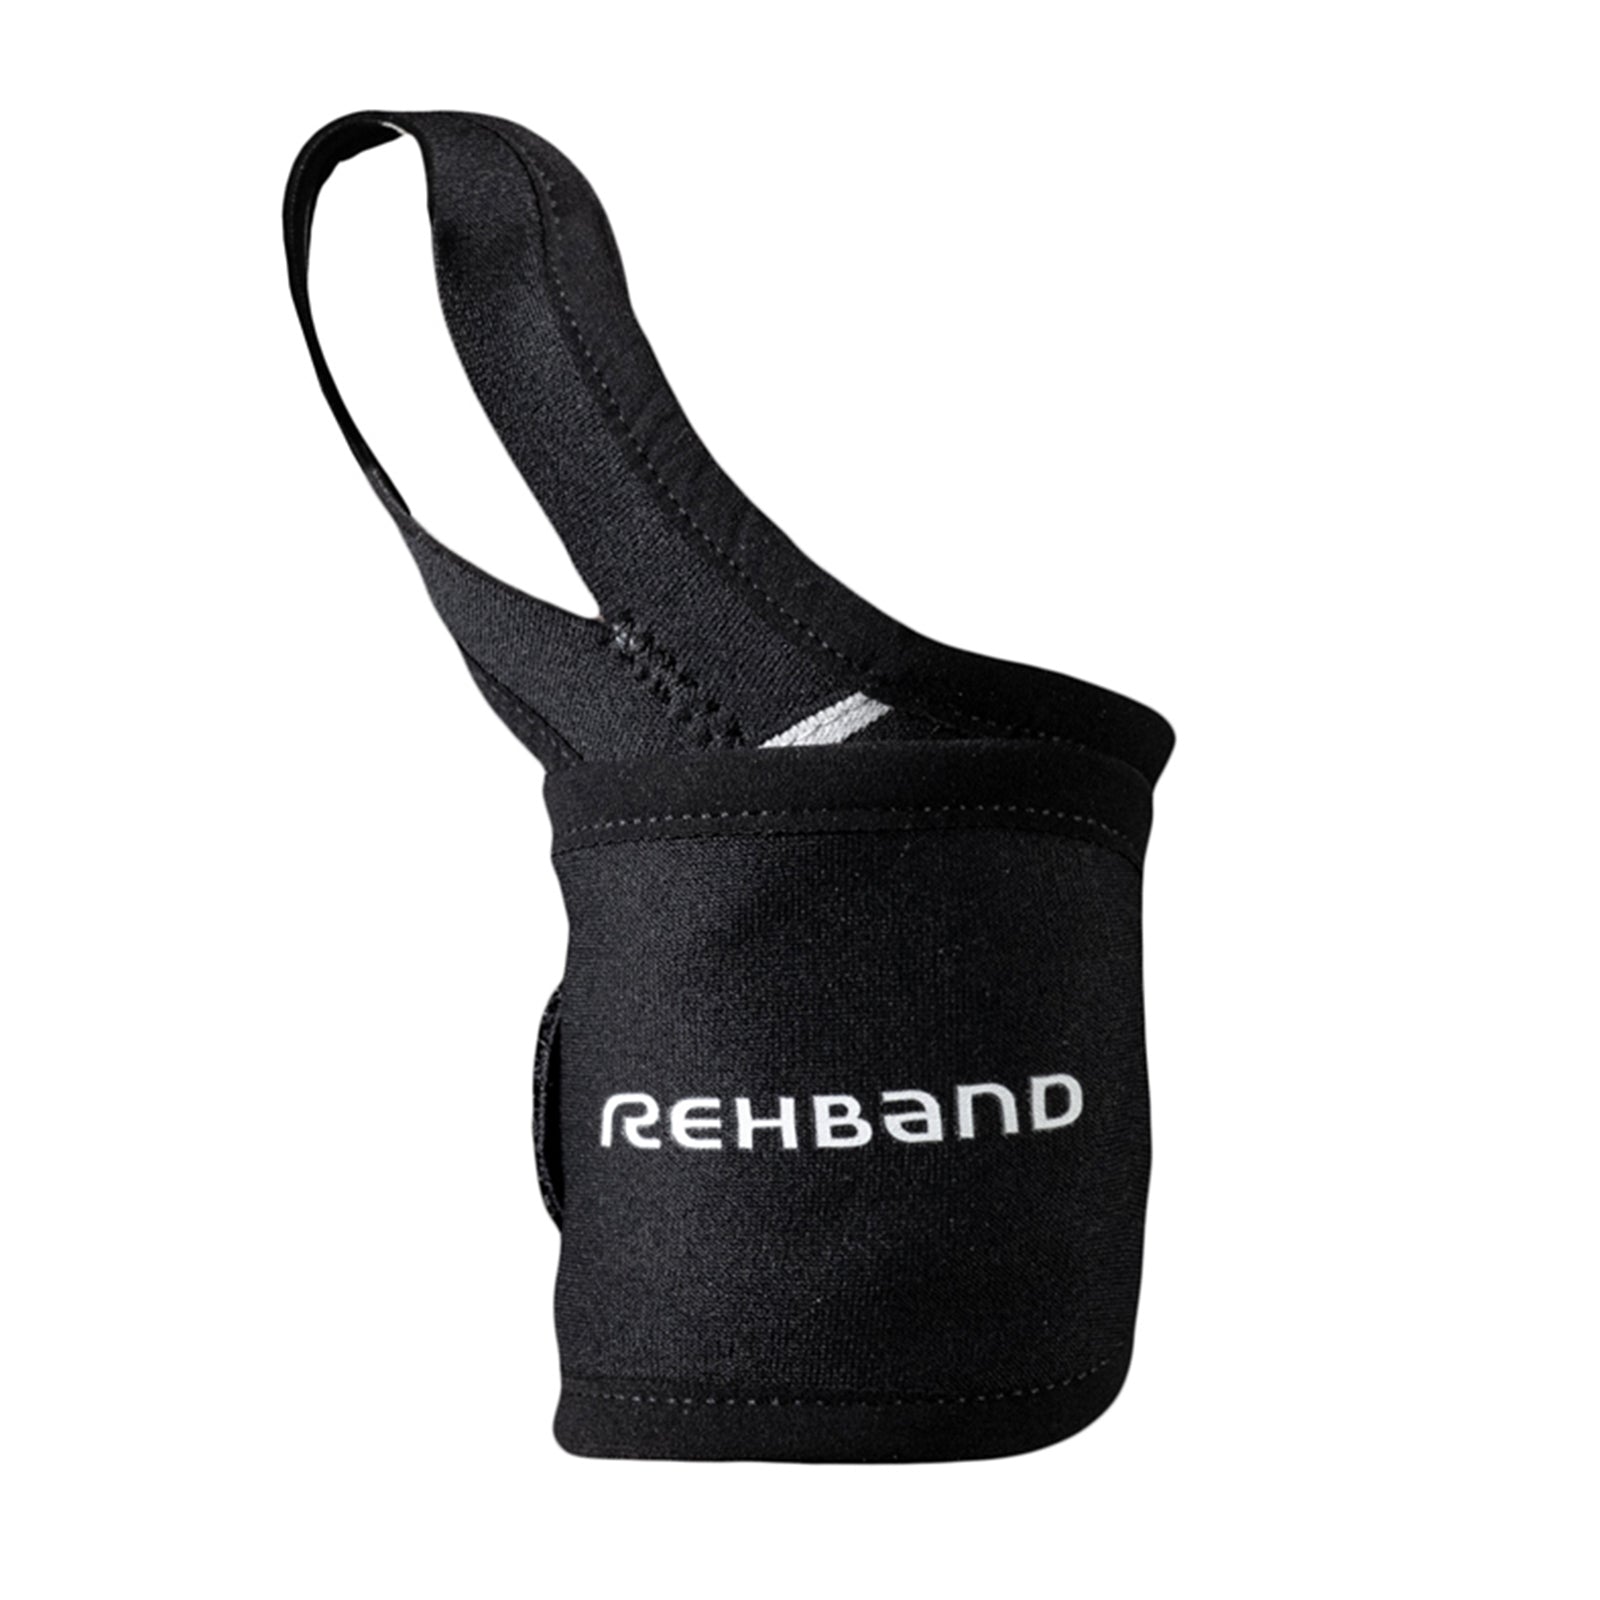 A black wrist & thumb support with a white Rehband lettering in the center